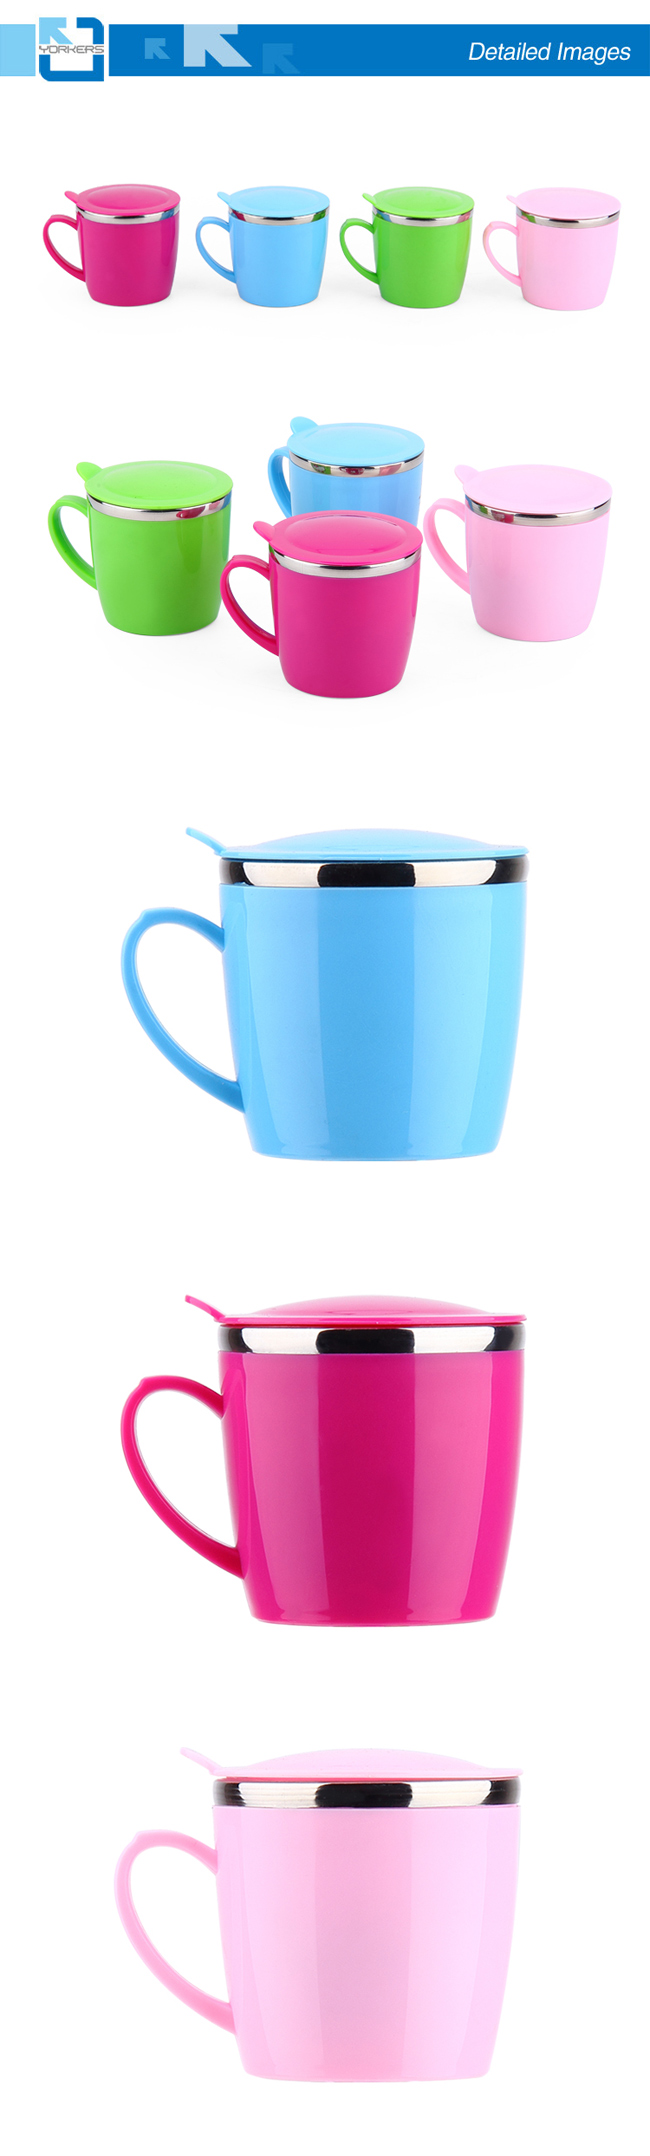 Wholesale Colourful Leak Proof Stainless Steel Metal Drink Cup for Children